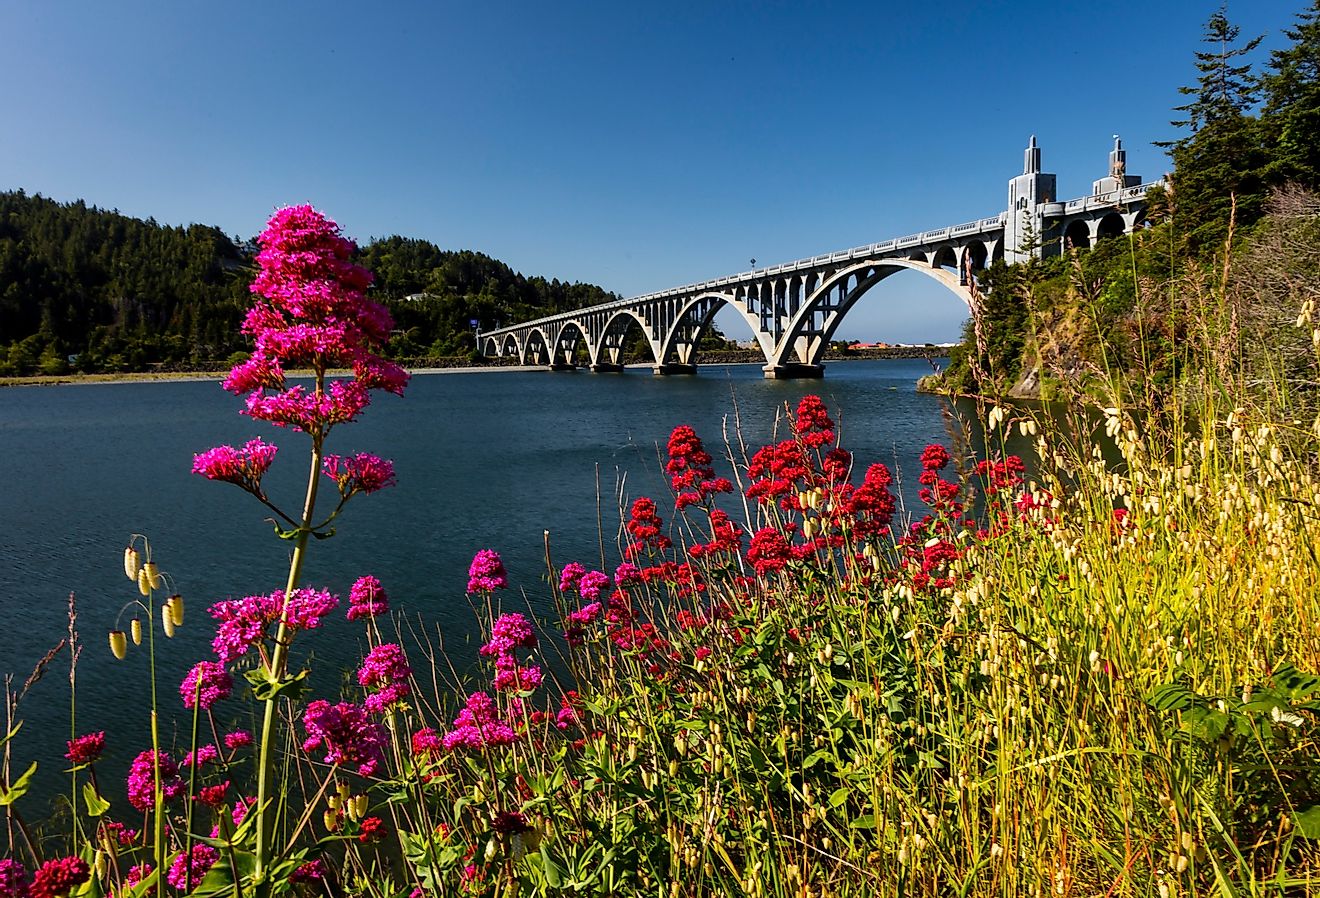 Isaac Lee Patterson Bridge, also known as the Rogue River Bridge Gold Beach, Oregon with pink flowers blooming.